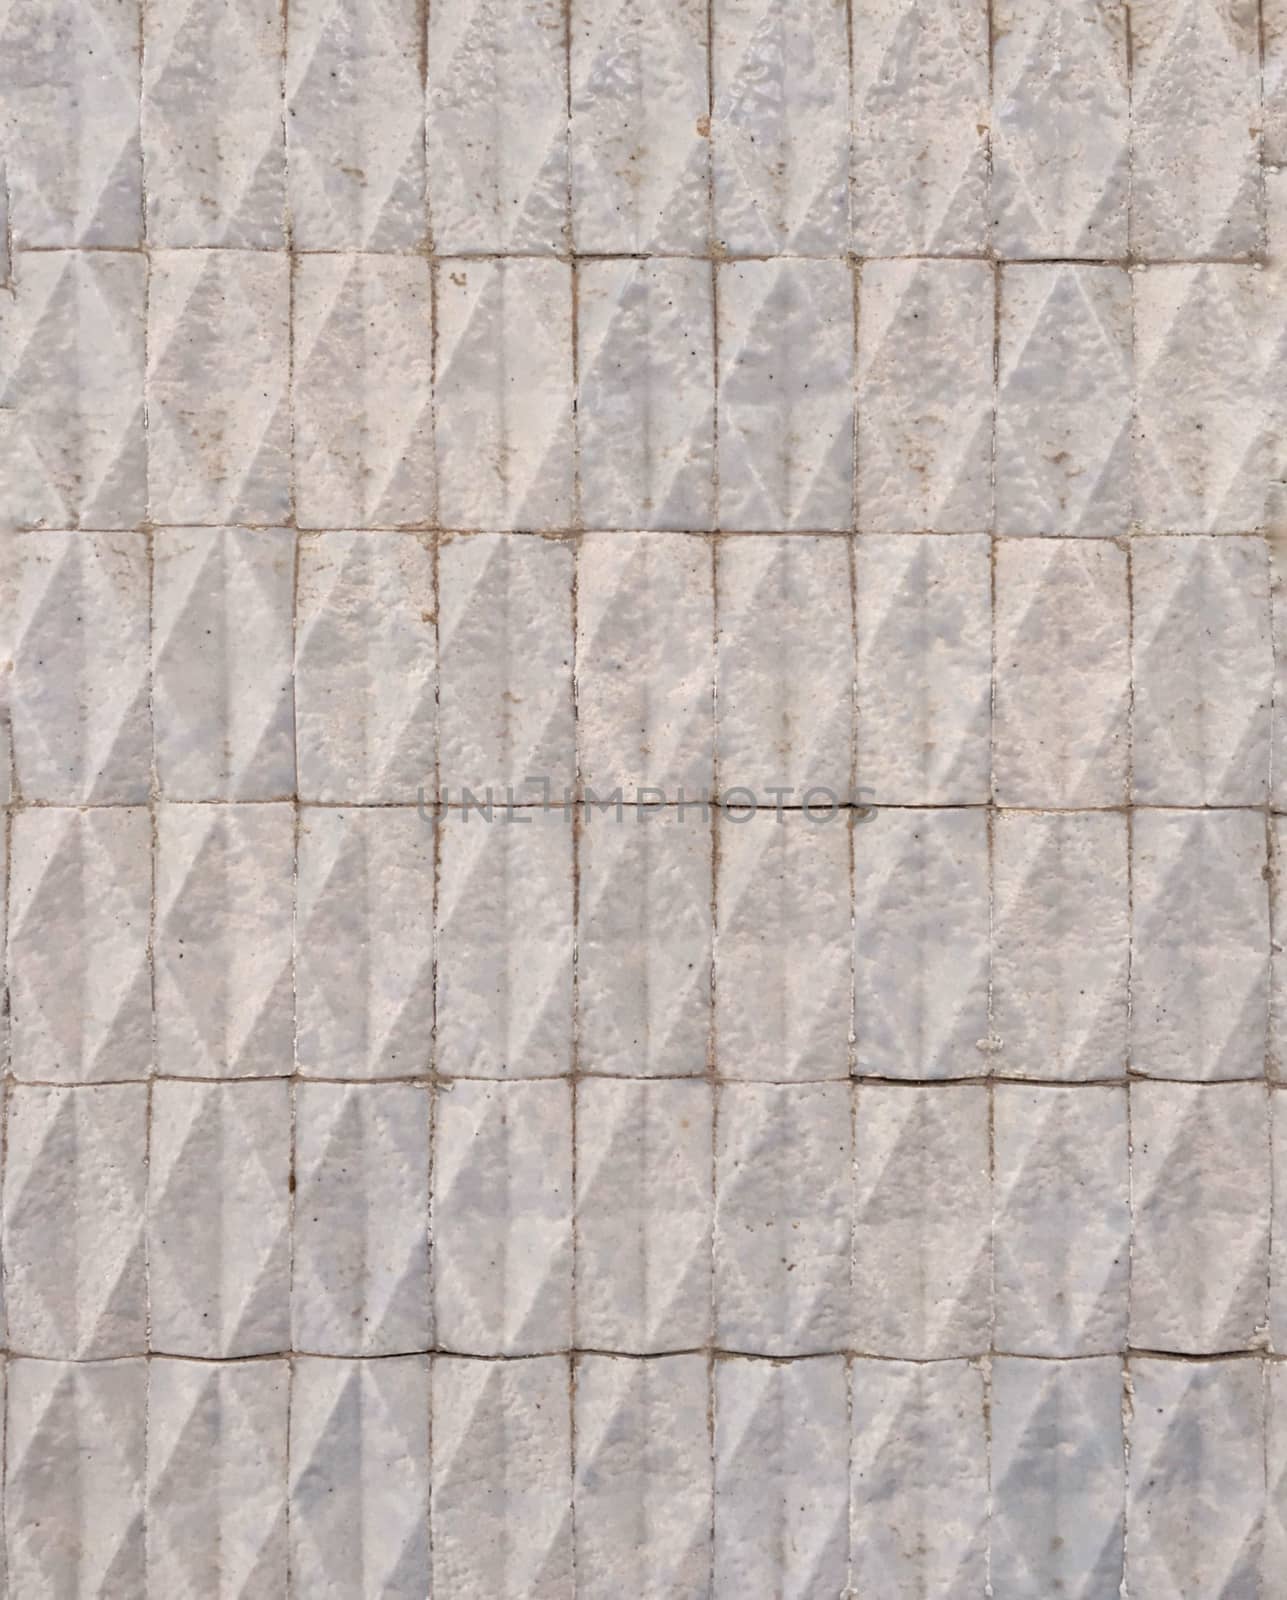 Pattern made with rough tiles by rarrarorro